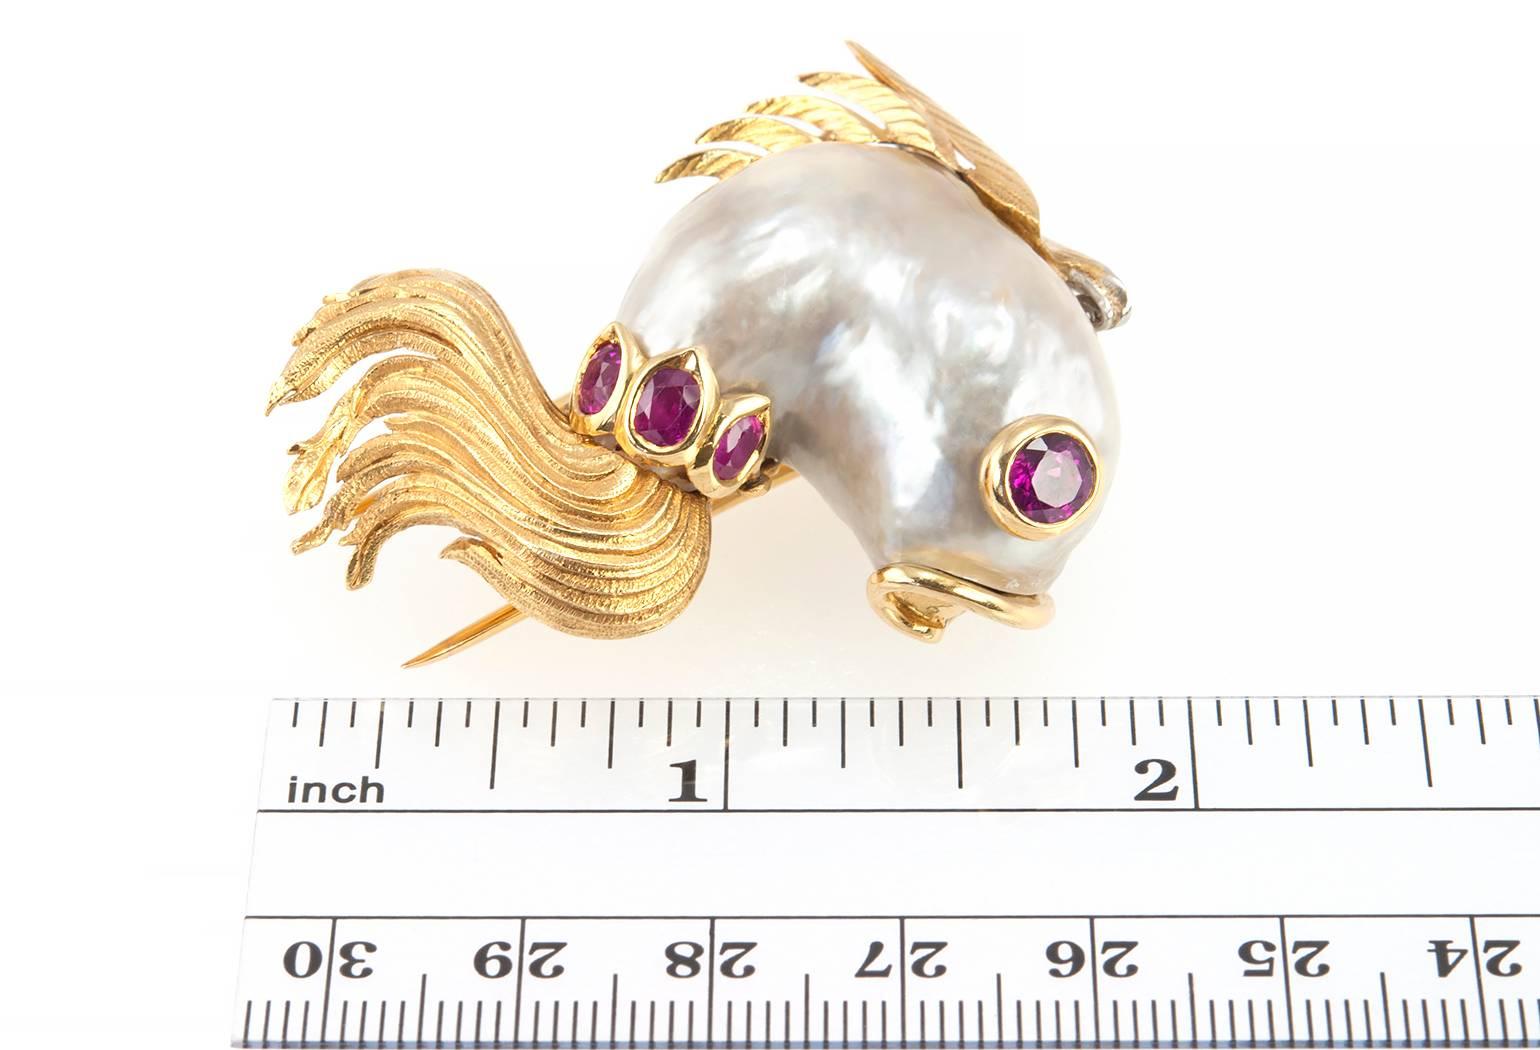 A fabulous and whimsical Cartier fish brooch featuring a freshwater pearl with 4 natural rubies and 16 single cut diamonds along the top fin in 18 karat yellow gold. Circa 1960s. The brooch measures approximately 1.97